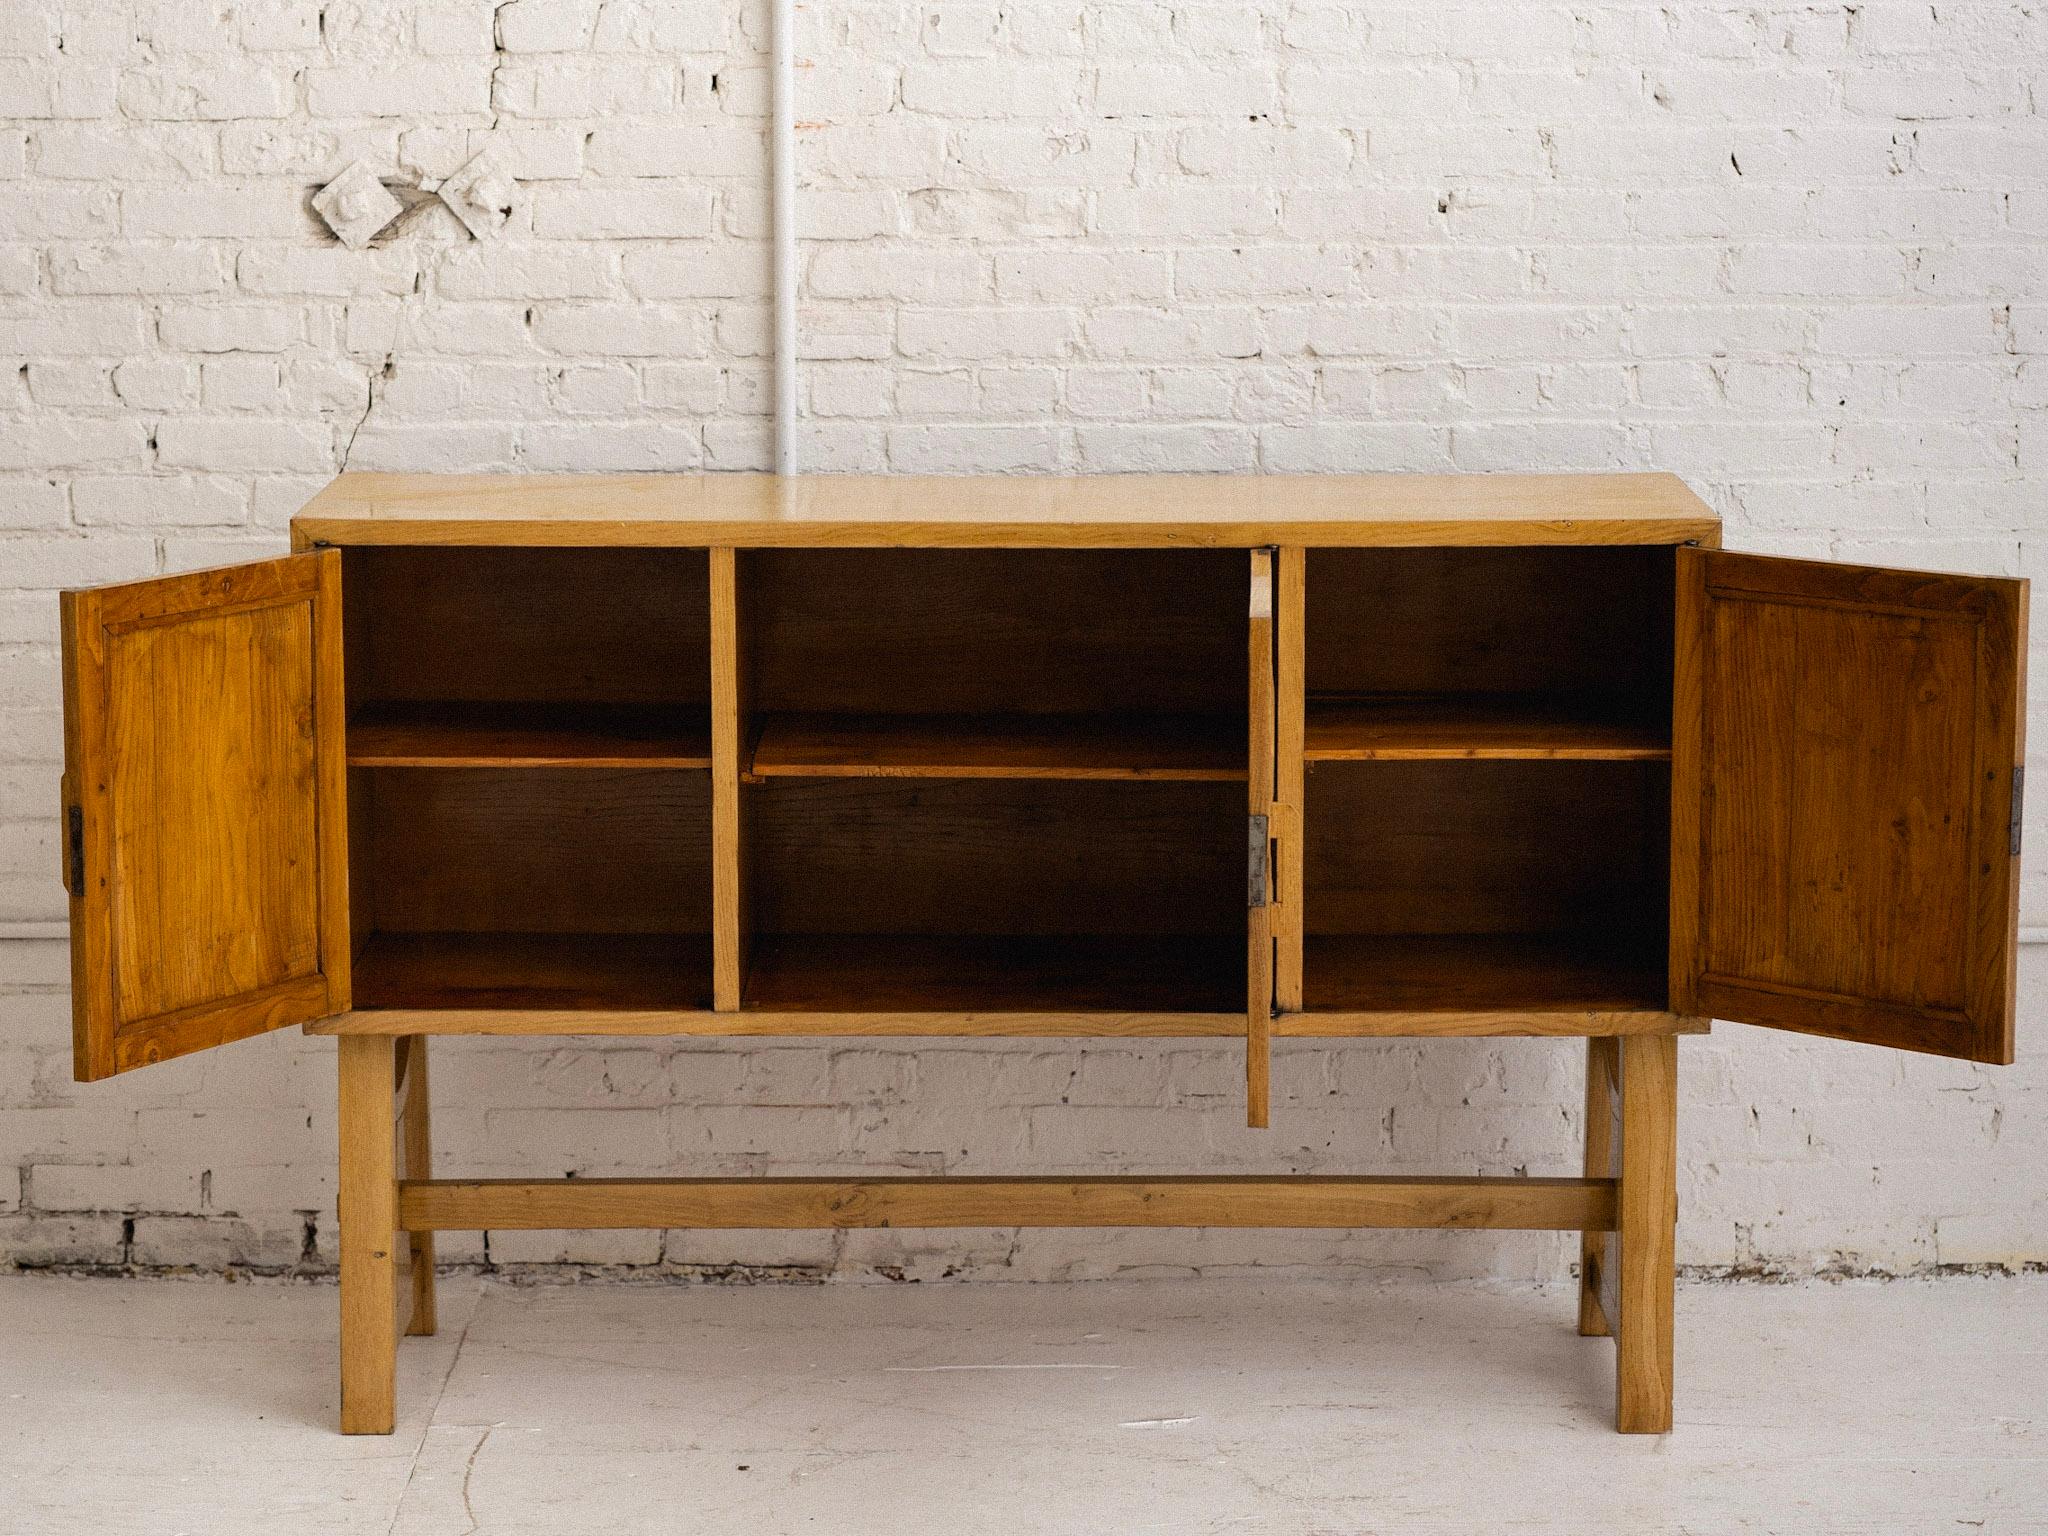 Midcentury Rustic Pine Italian Sideboard In Fair Condition For Sale In Brooklyn, NY